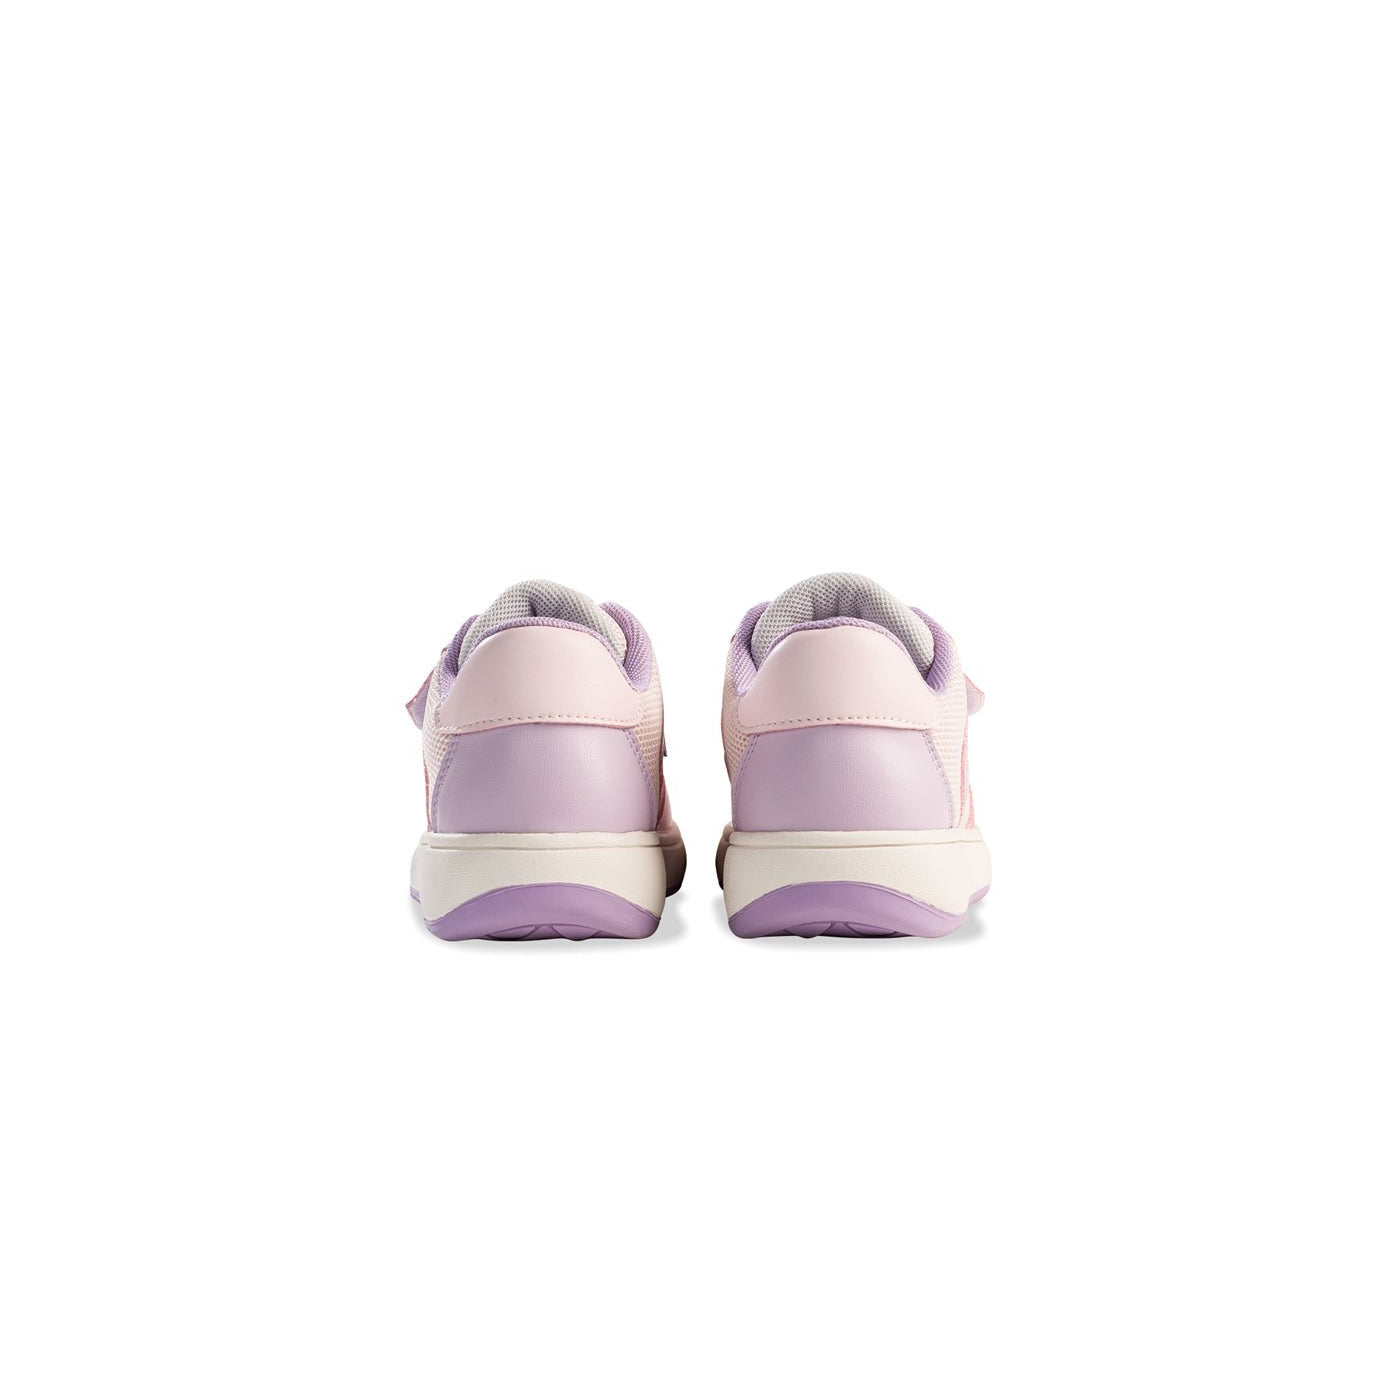 Mobility Breathable Anti-slip Kids Pink Sneakers - 0cm